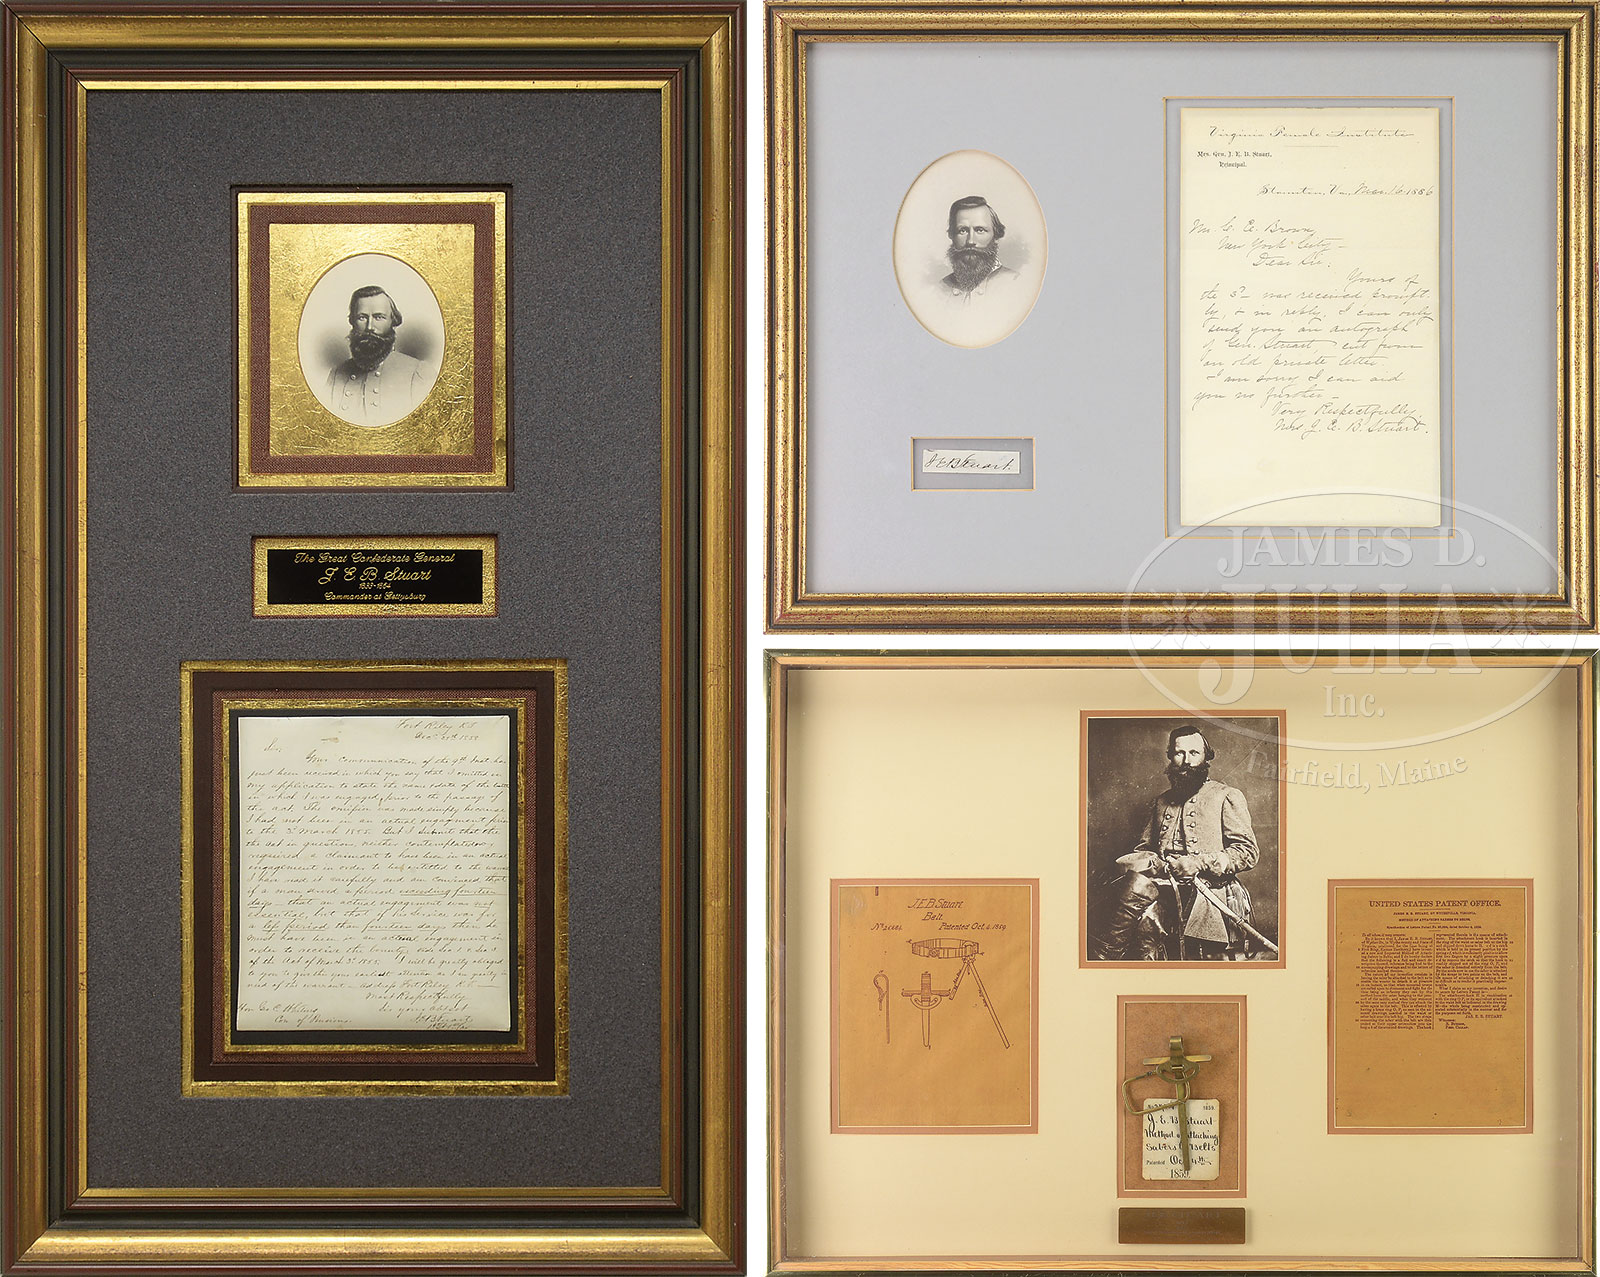 Part of an Archive of JEB Stuart Material Including His Original Patent Model and Patent for his Famous Sword Hanger